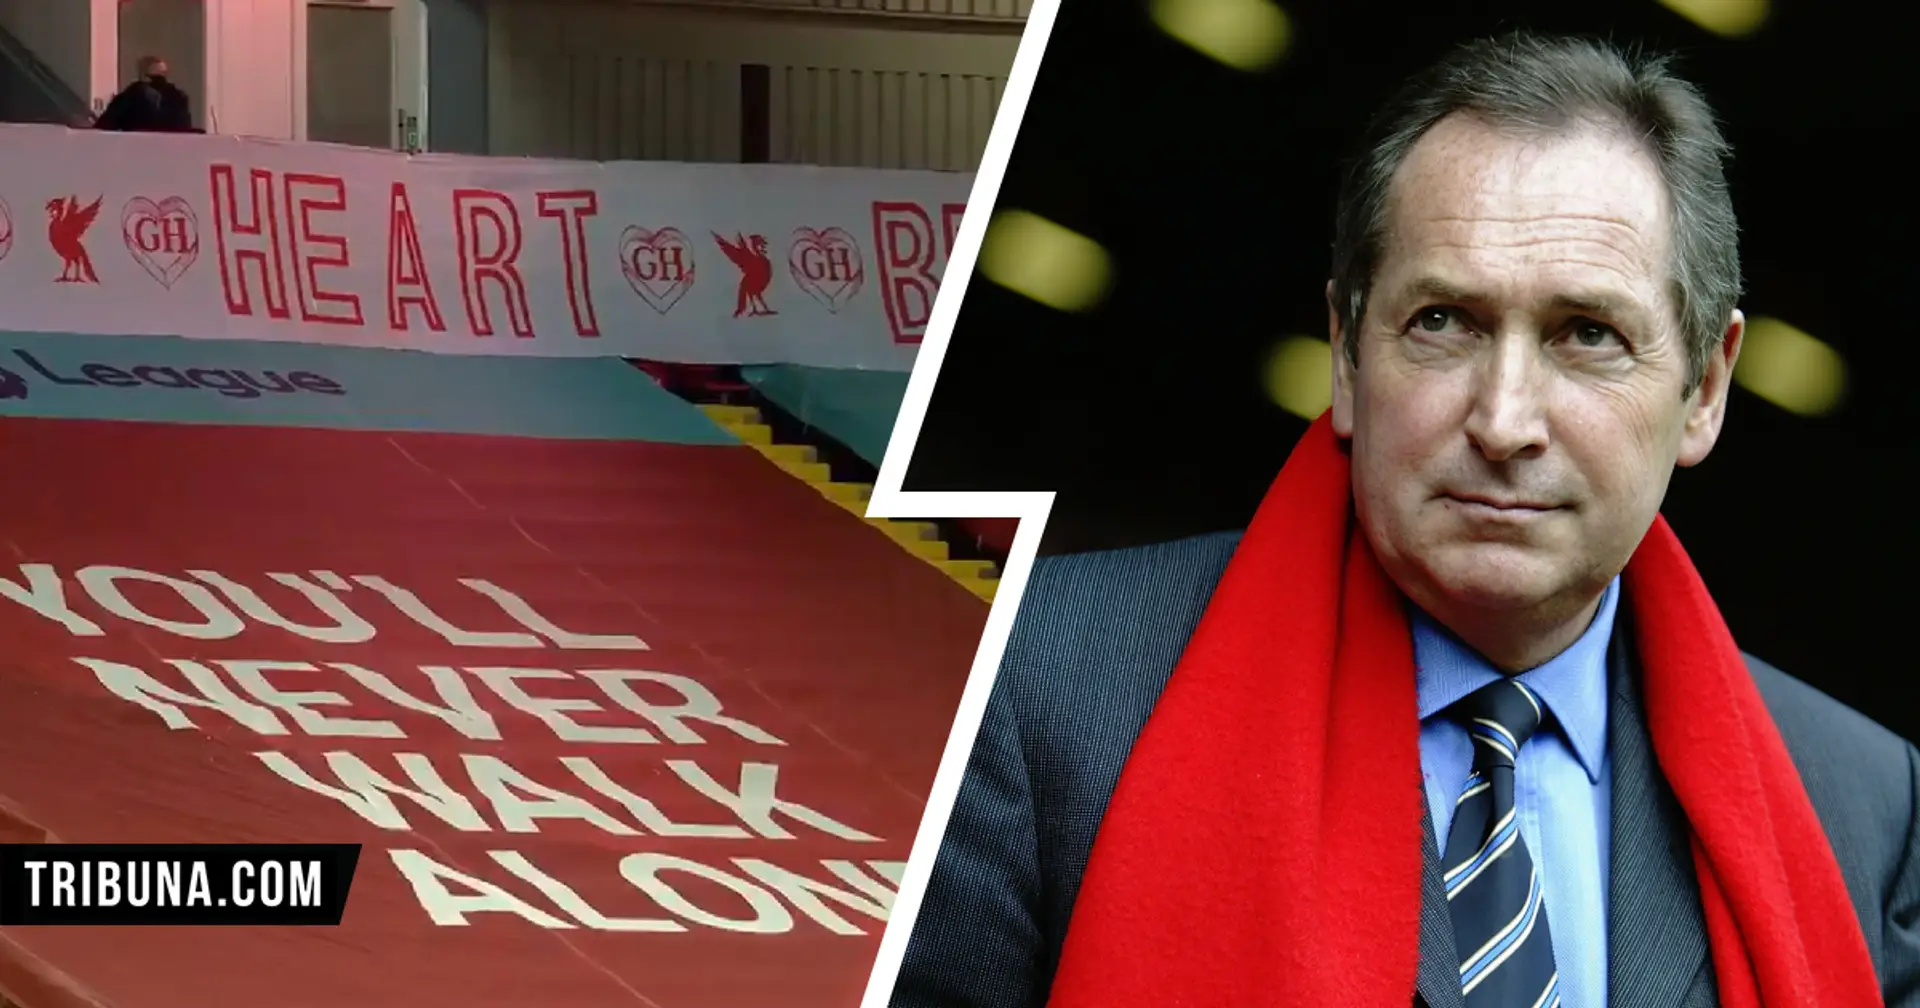 Liverpool's touching pre-game tribute to Gerard Houllier ahead of Spurs clash (video)